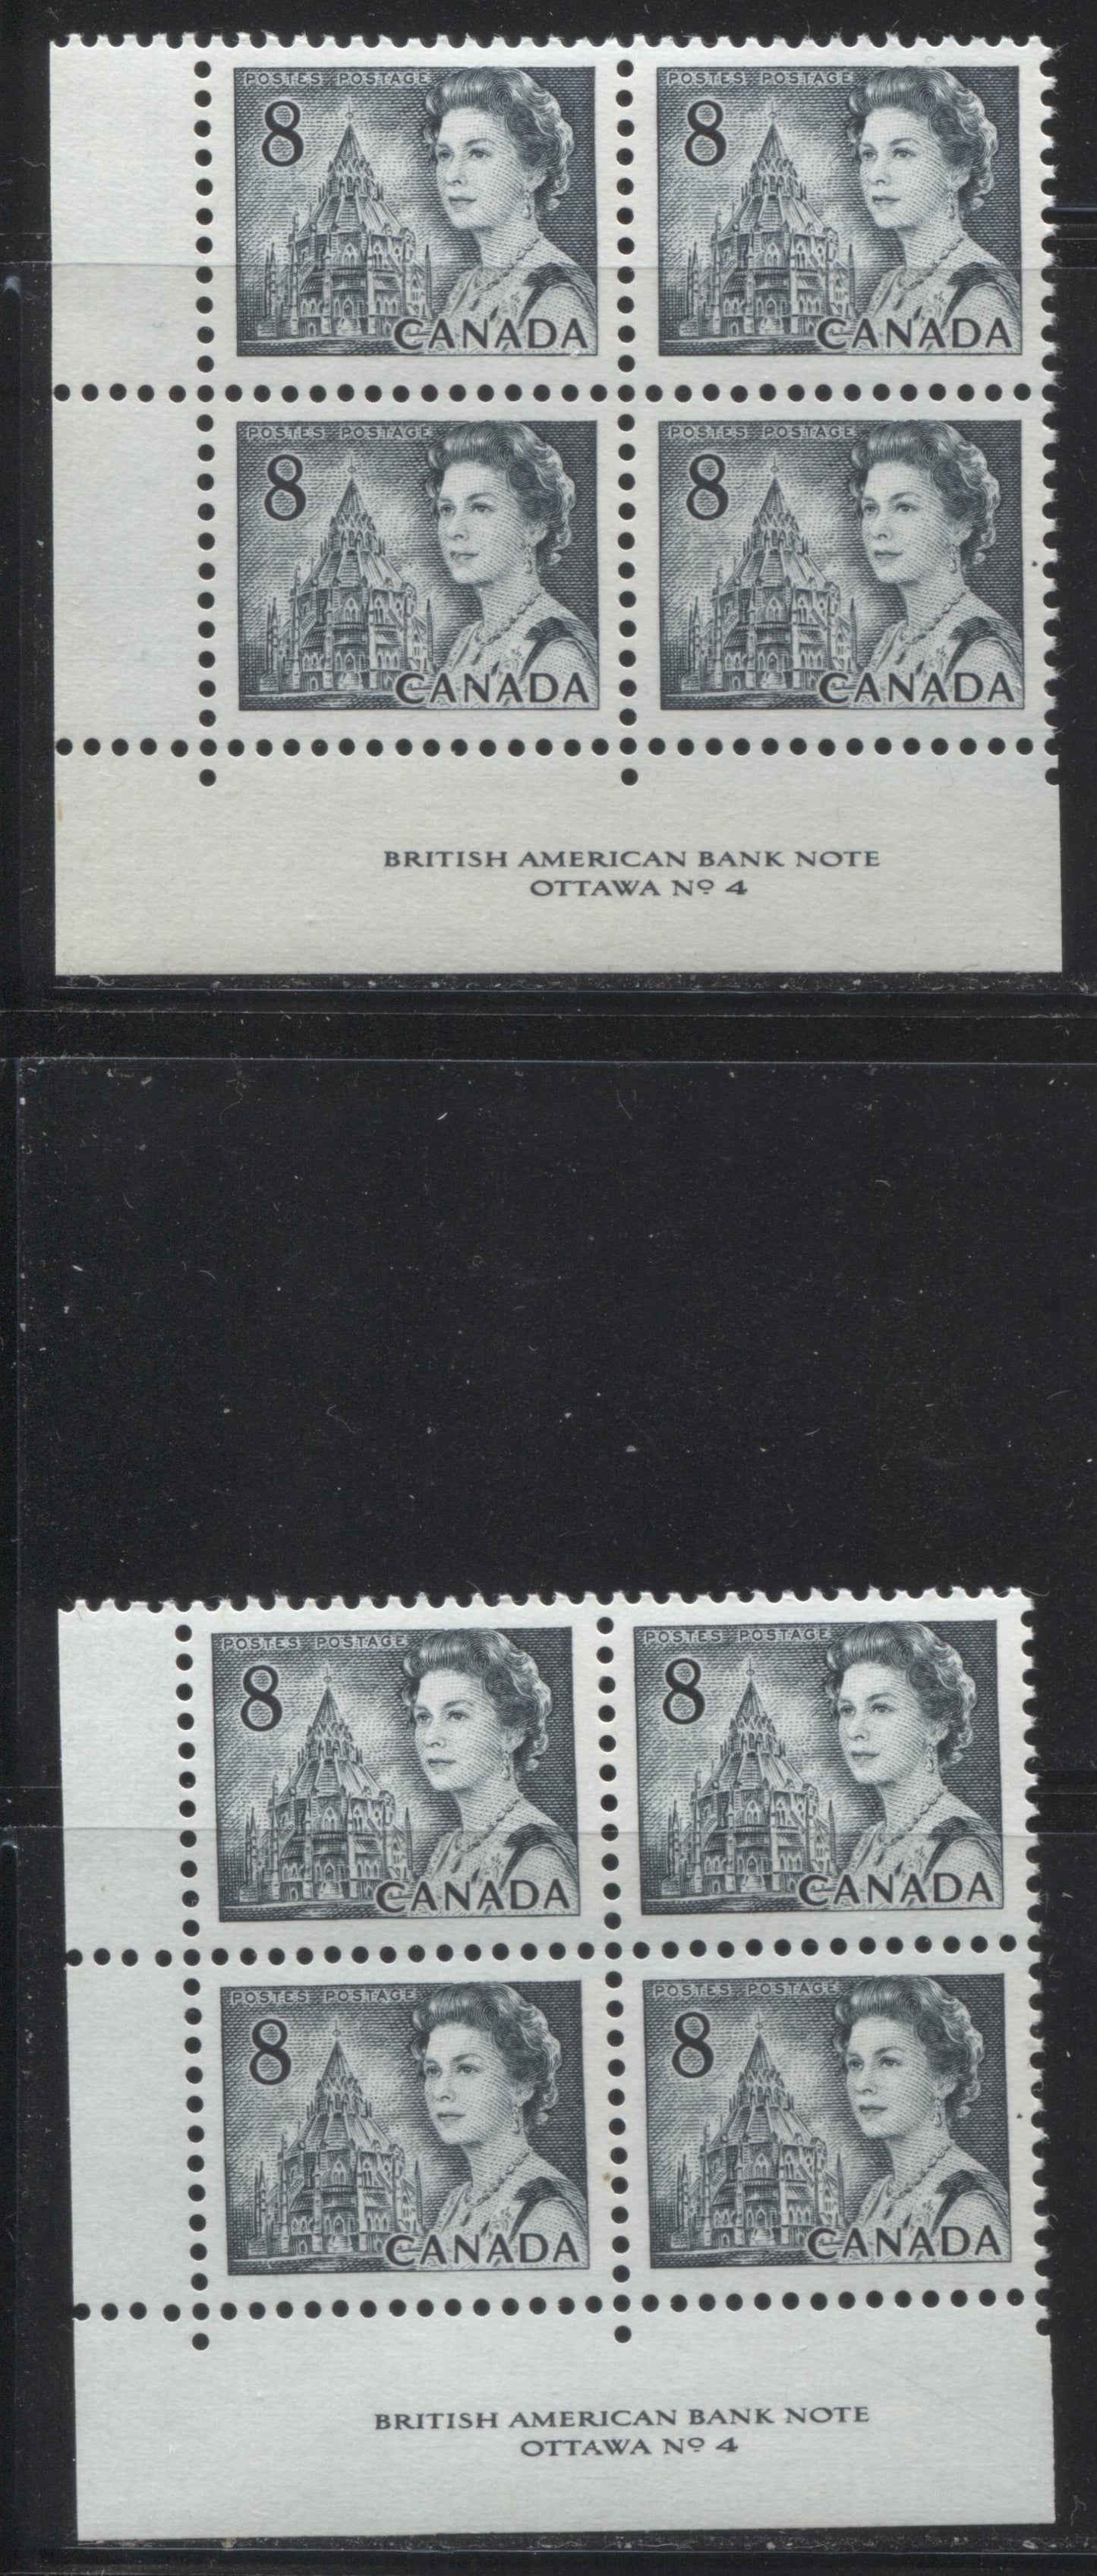 Lot 135 Canada #544ii 8c Slate Queen Elizabeth II, 1967-1973 Centennial Issue, Two VFNH LL Plate 4 Blocks Of 4 On LF Grayish White & Violet On Back, Ribbed Papers With PVA Gums